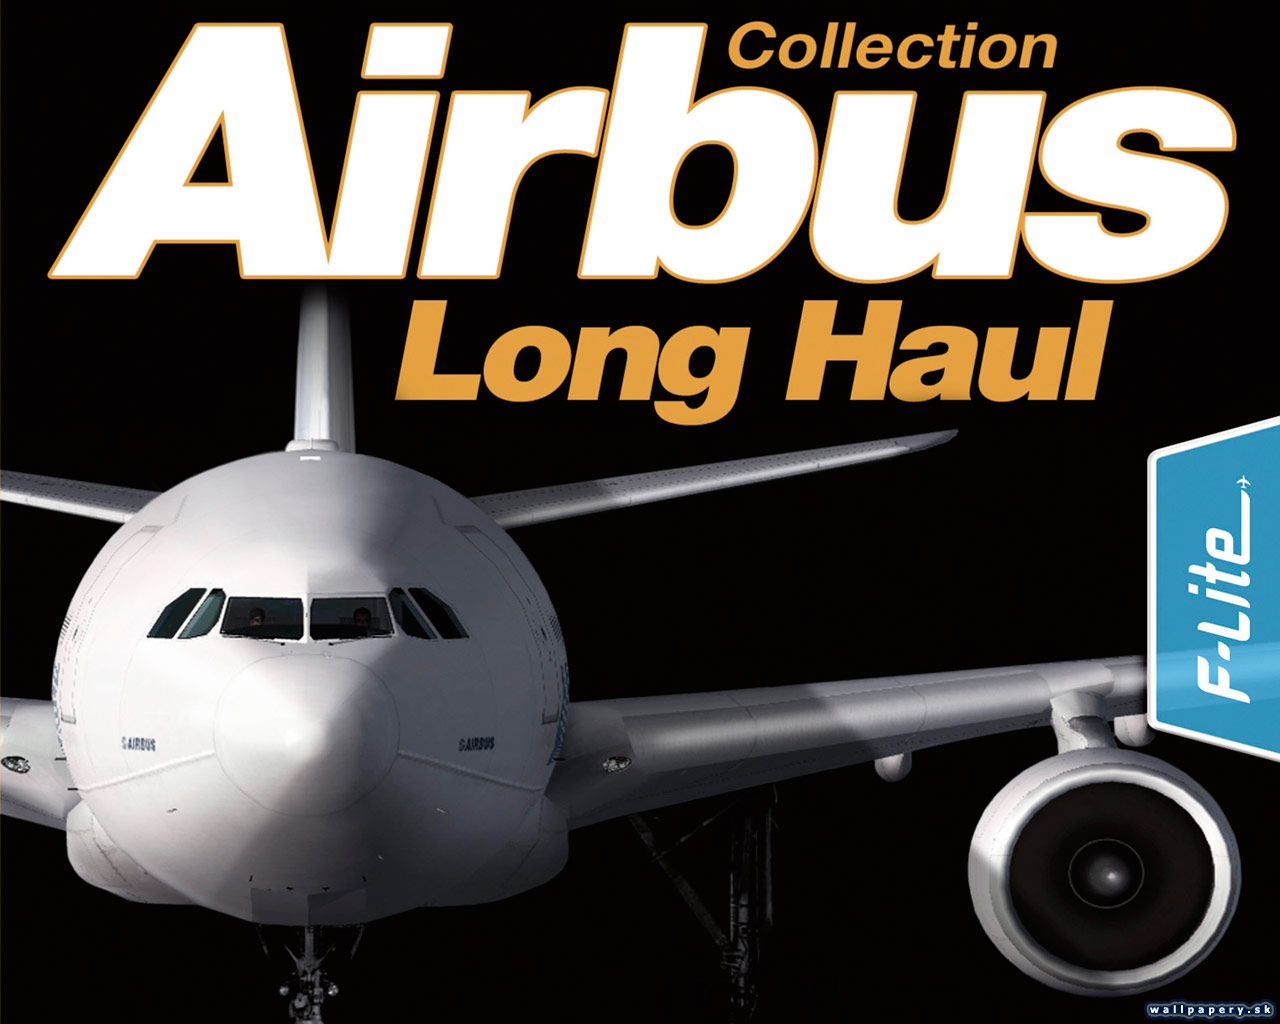 Airbus Collection: Long Haul - wallpaper 1